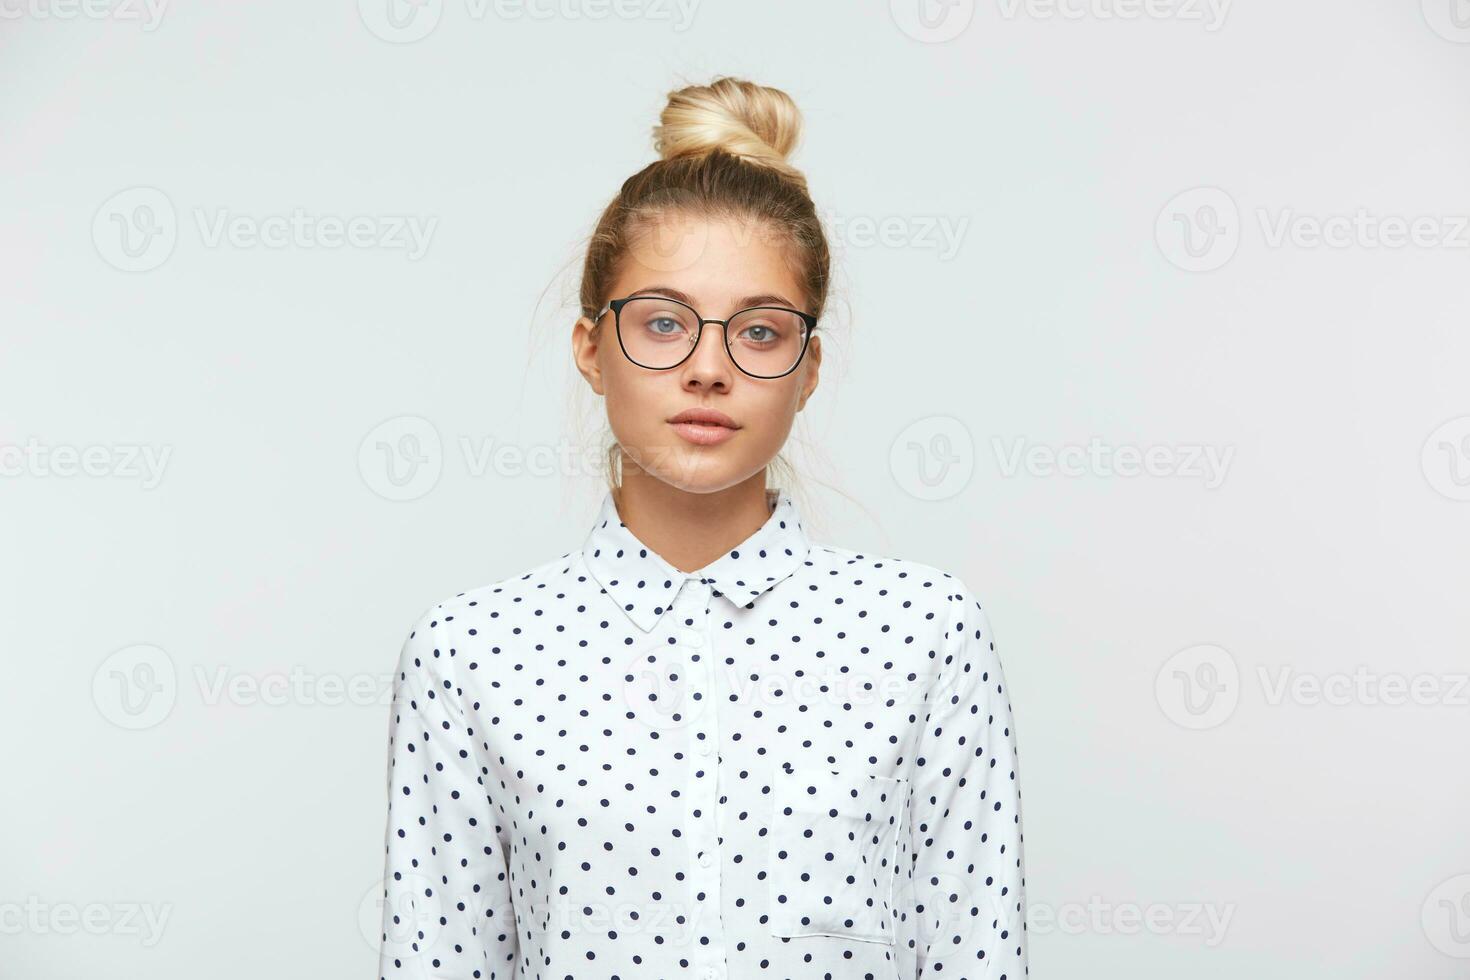 Closeup of serious beautiful young woman with bun wears polka dot shirt and glasses feels unhappy and looks to the camera isolated over white background photo